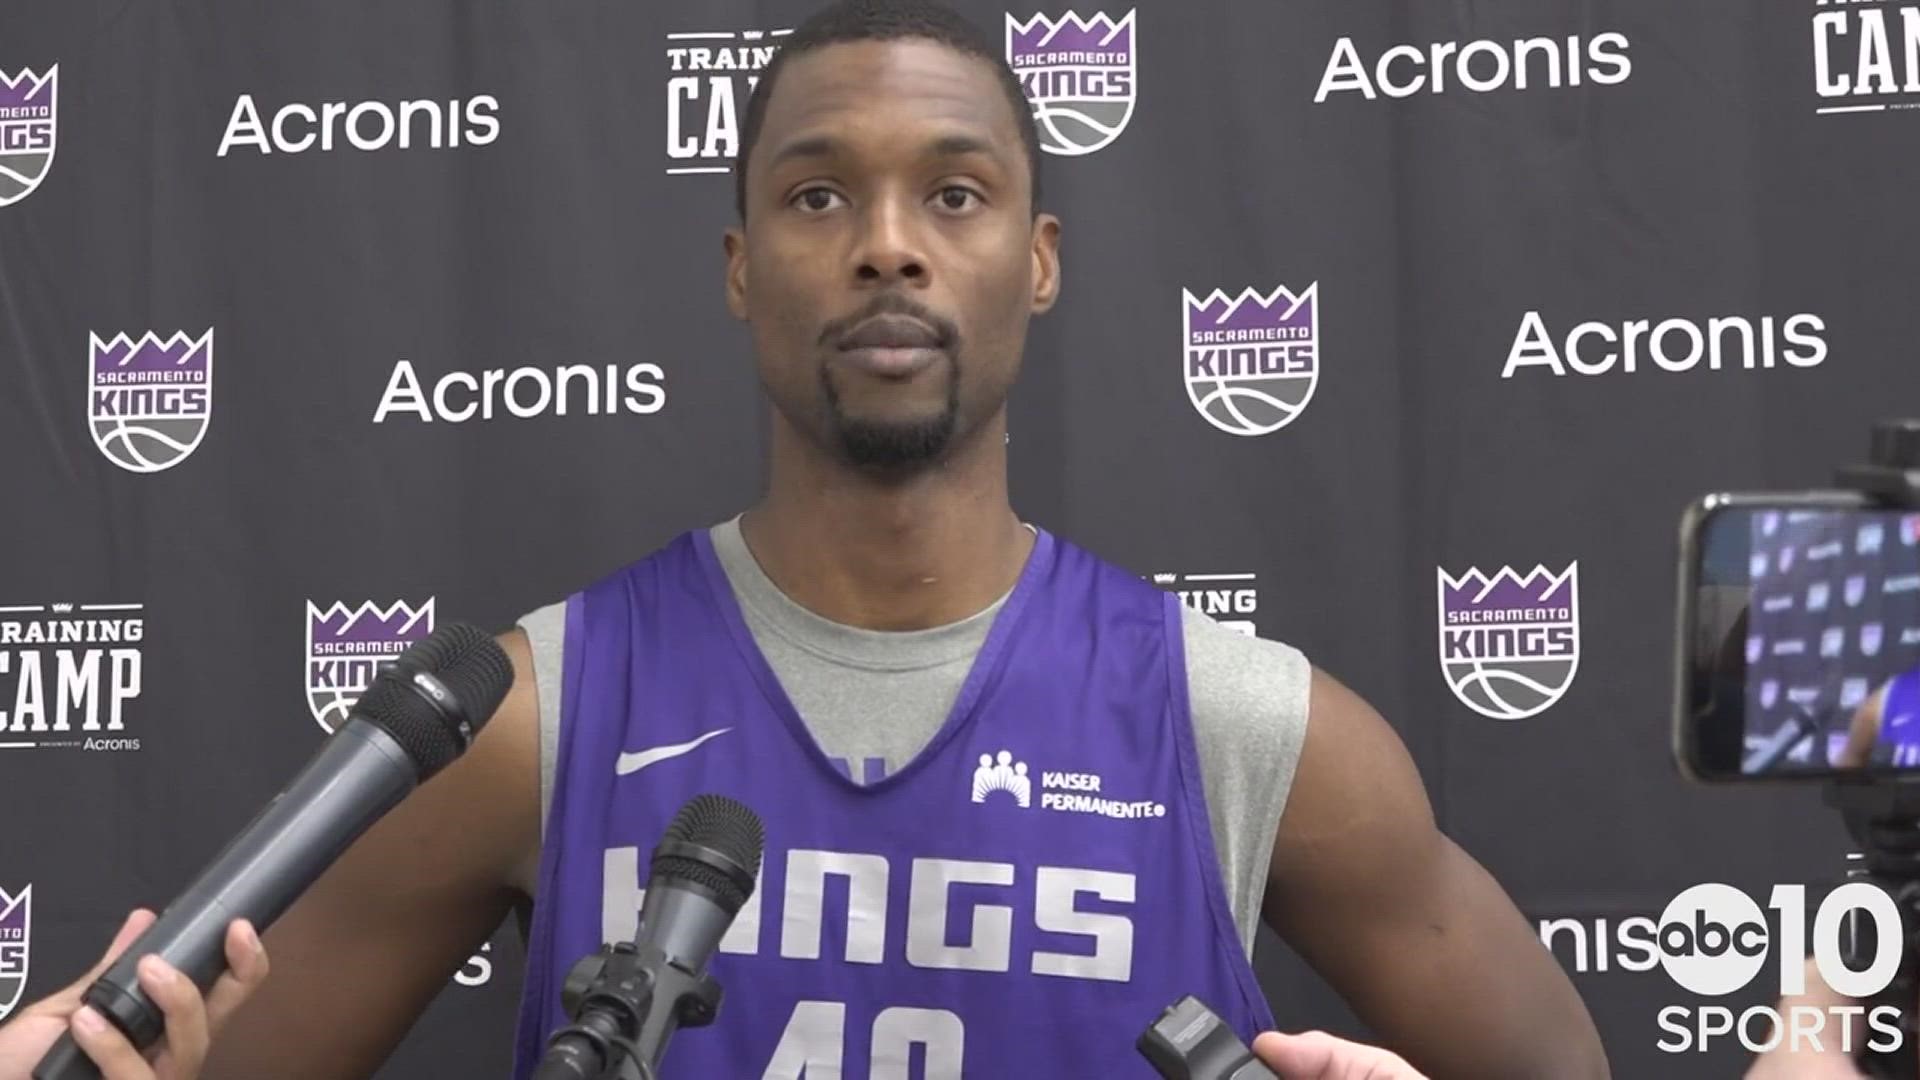 Harrison Barnes on the opening of Kings training camp and, as a Players Association executive, his thoughts on the NBA's mandate for COVID-19 vaccinations.